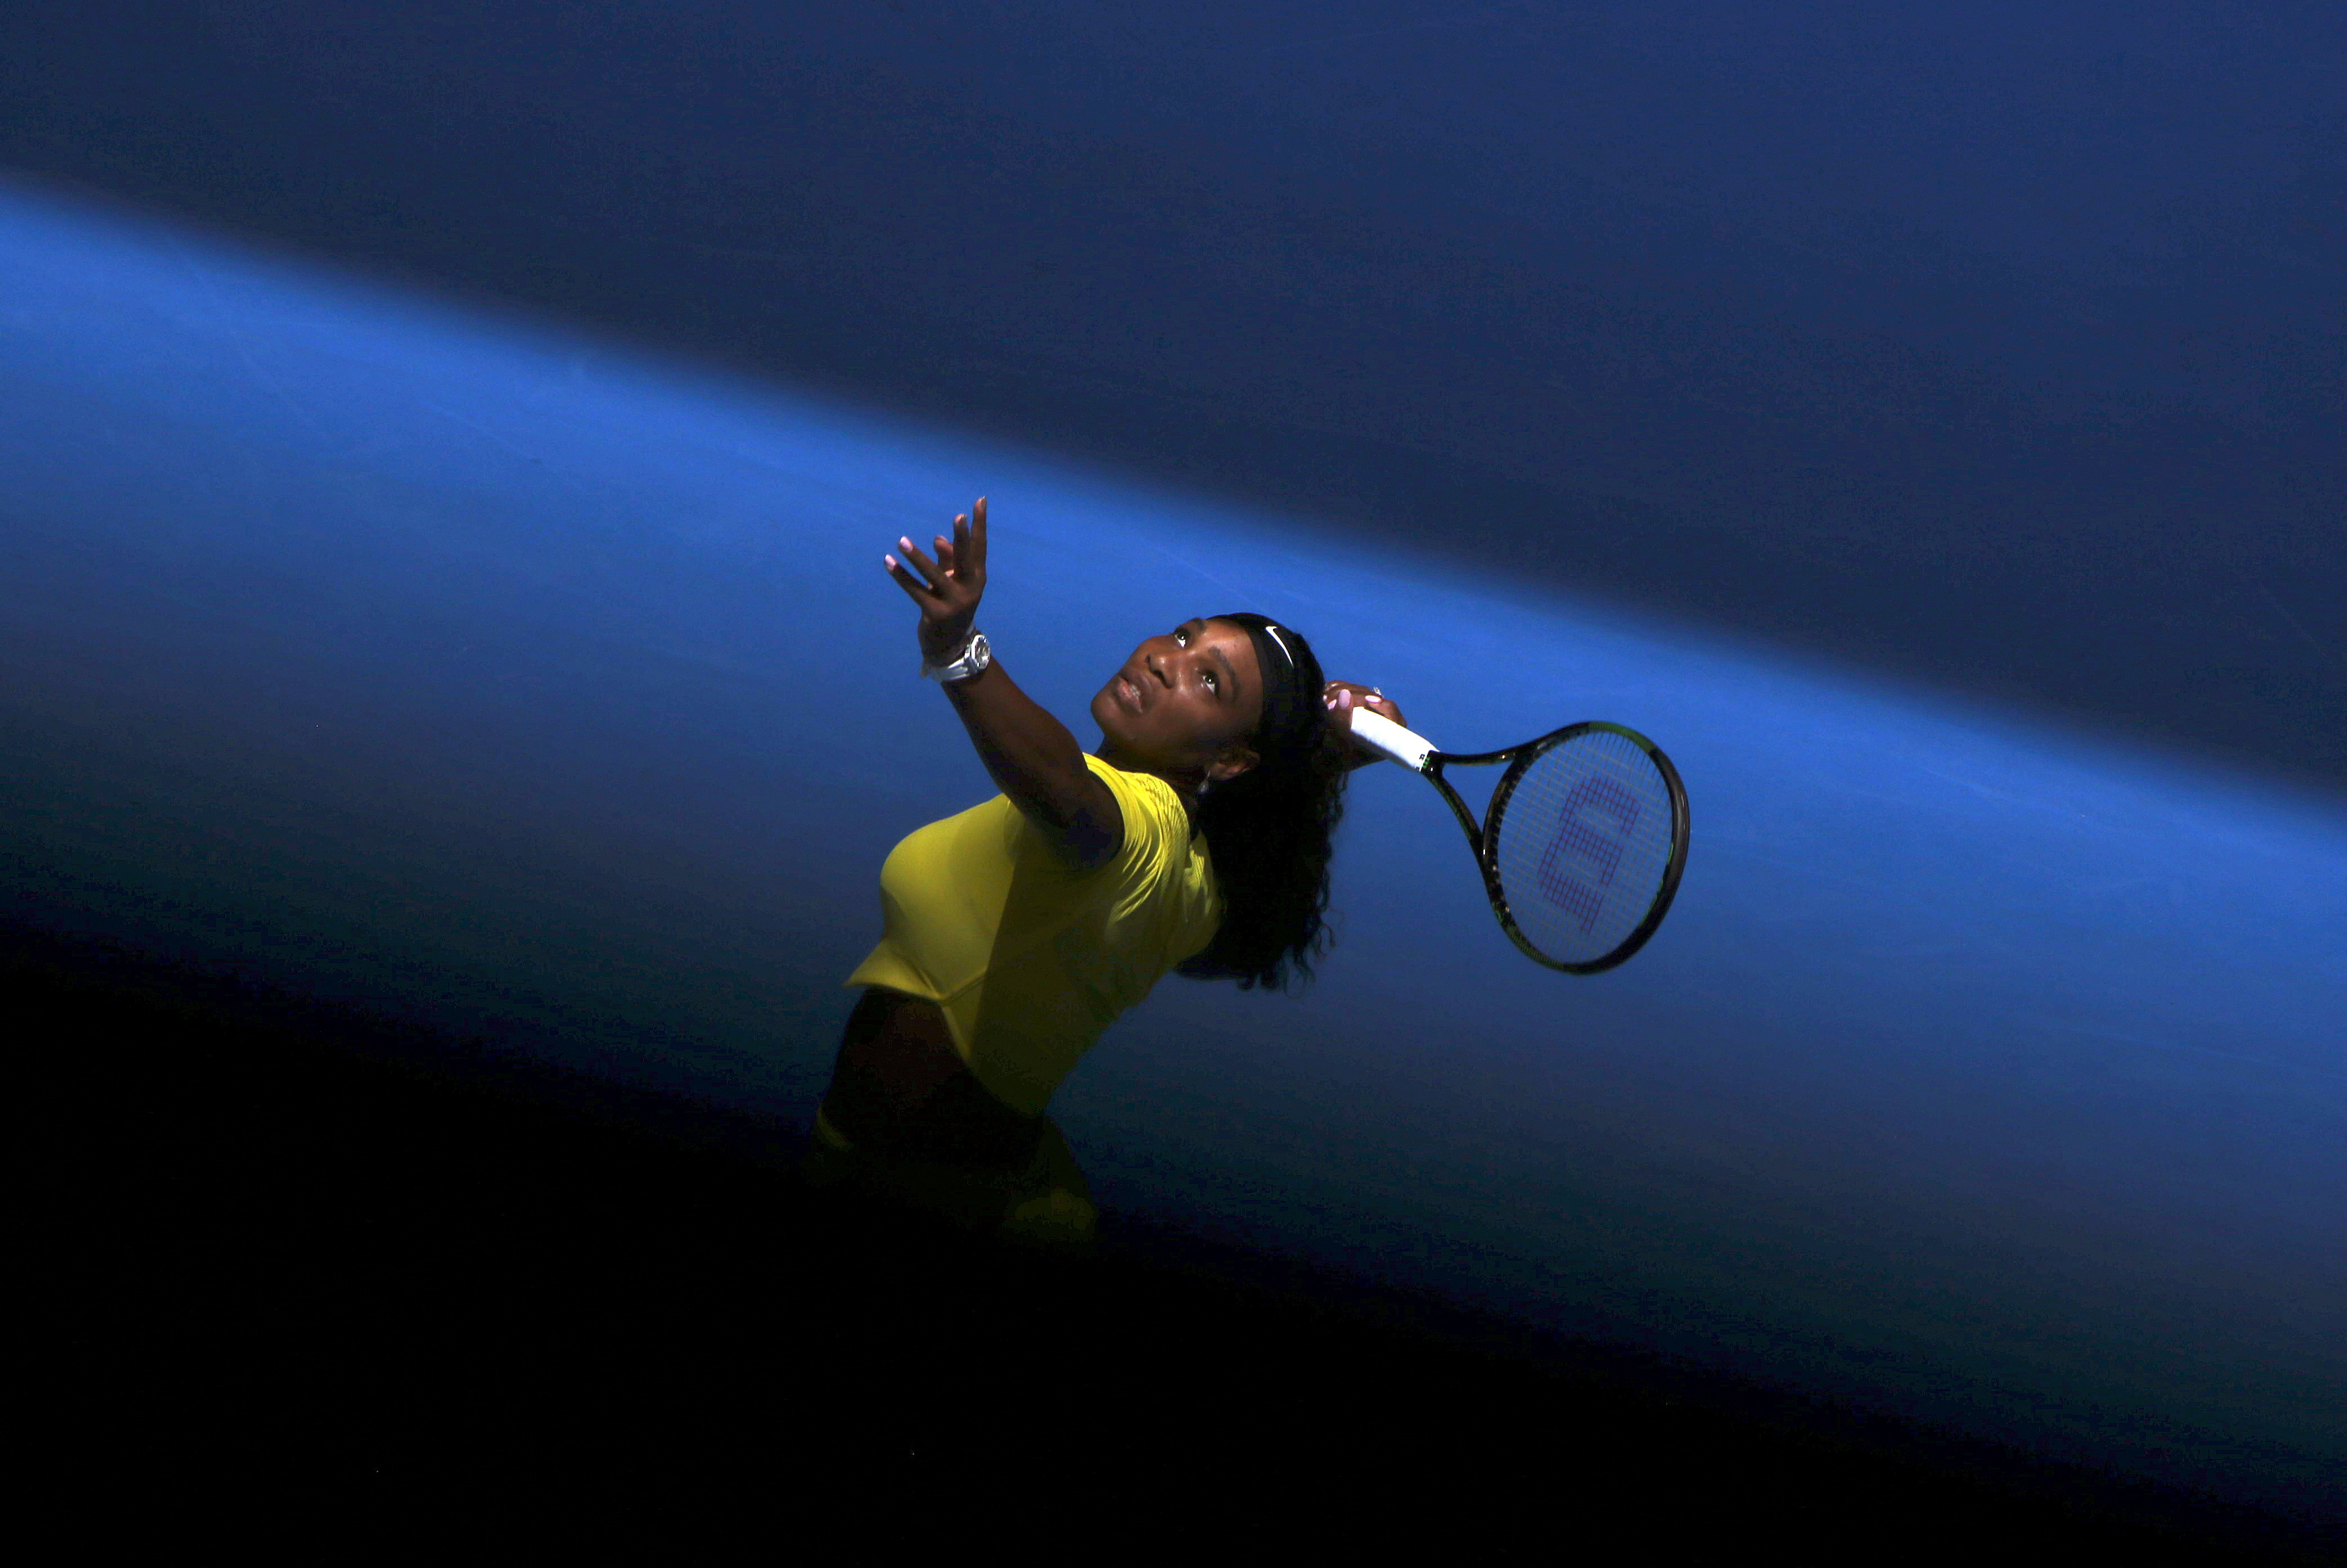 Williams of the U.S. serves during her first round match against Italy's Giorgi at the Australian Open tennis tournament at Melbourne Park, Australia